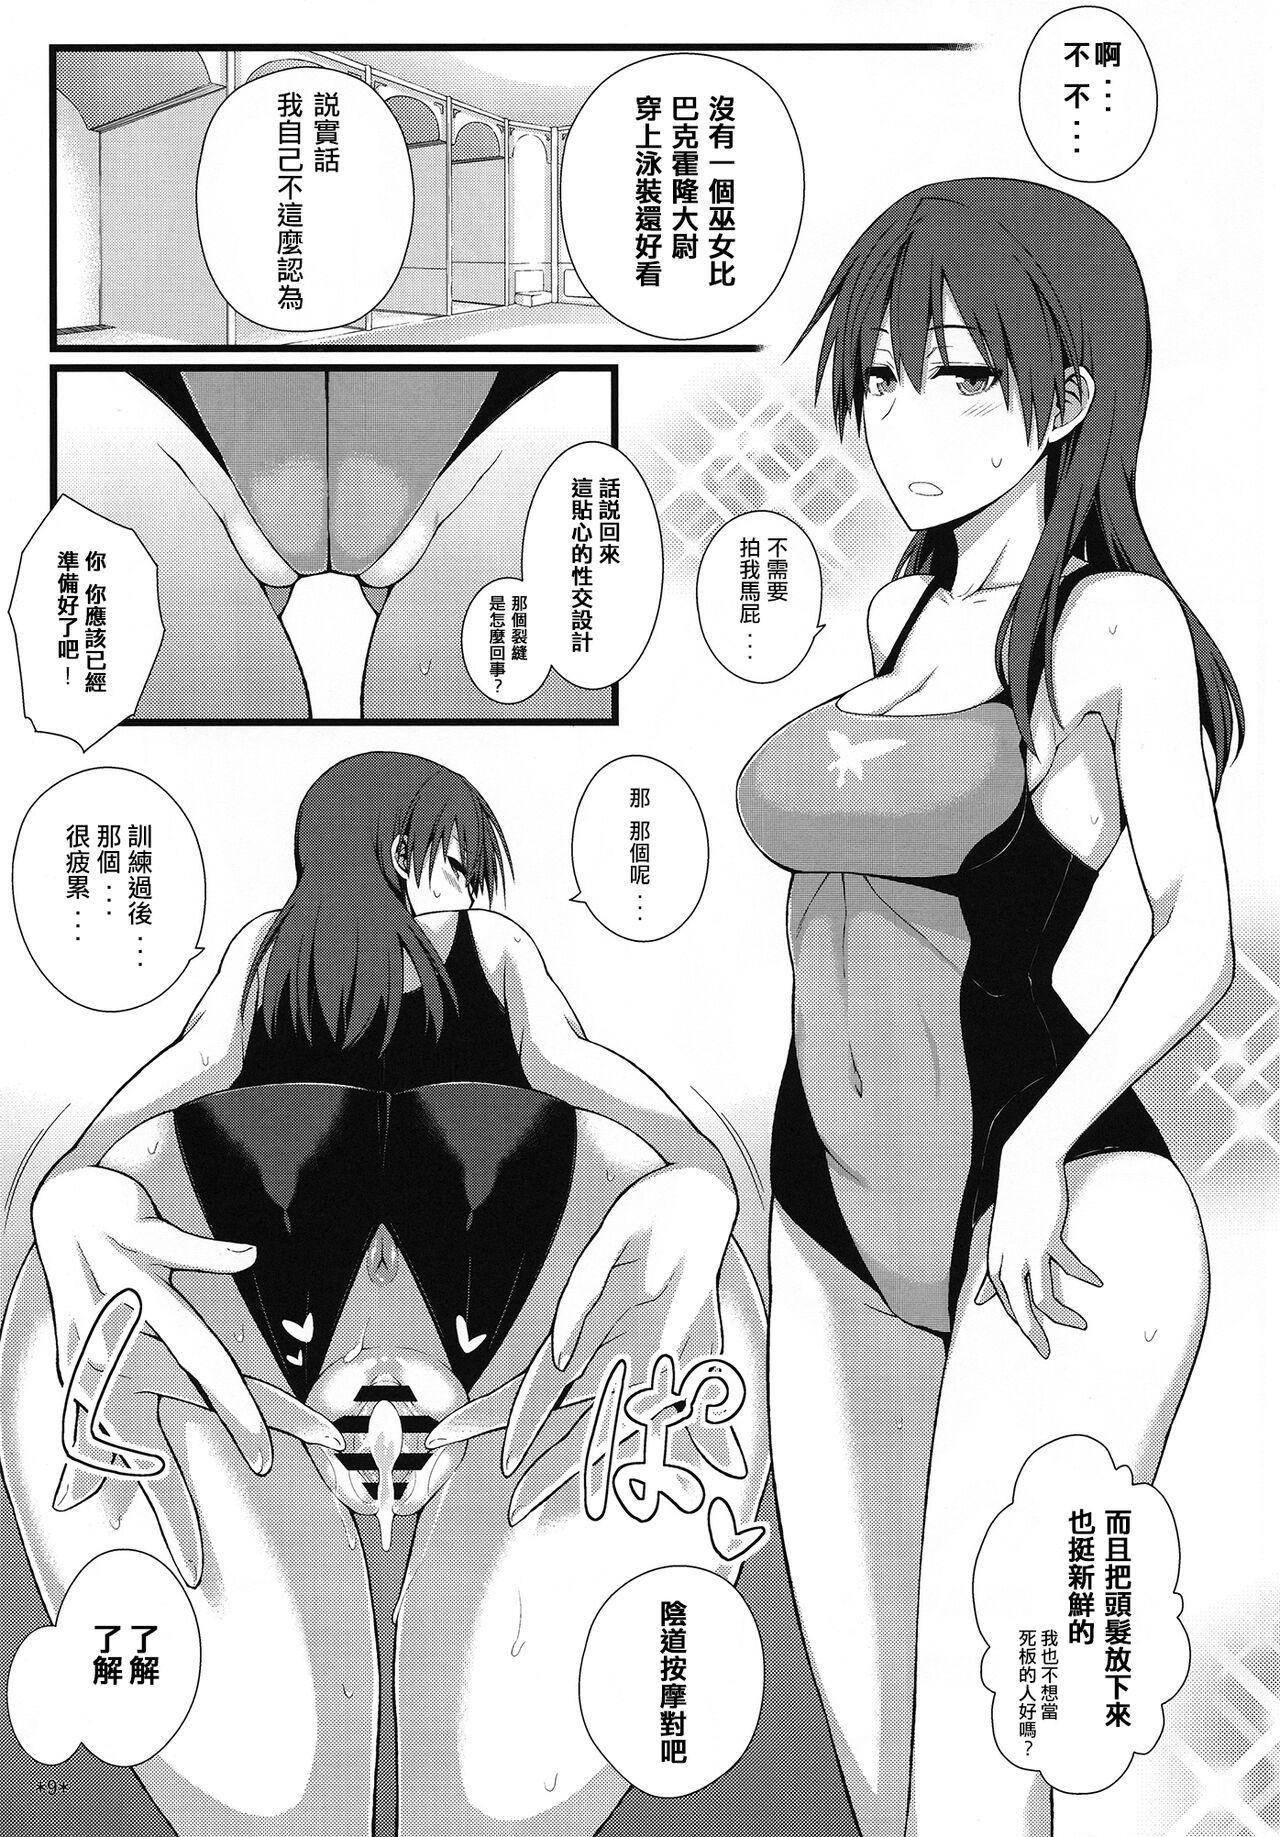 Girl KARLSLAND ABSORB - Strike witches Hand - Page 10